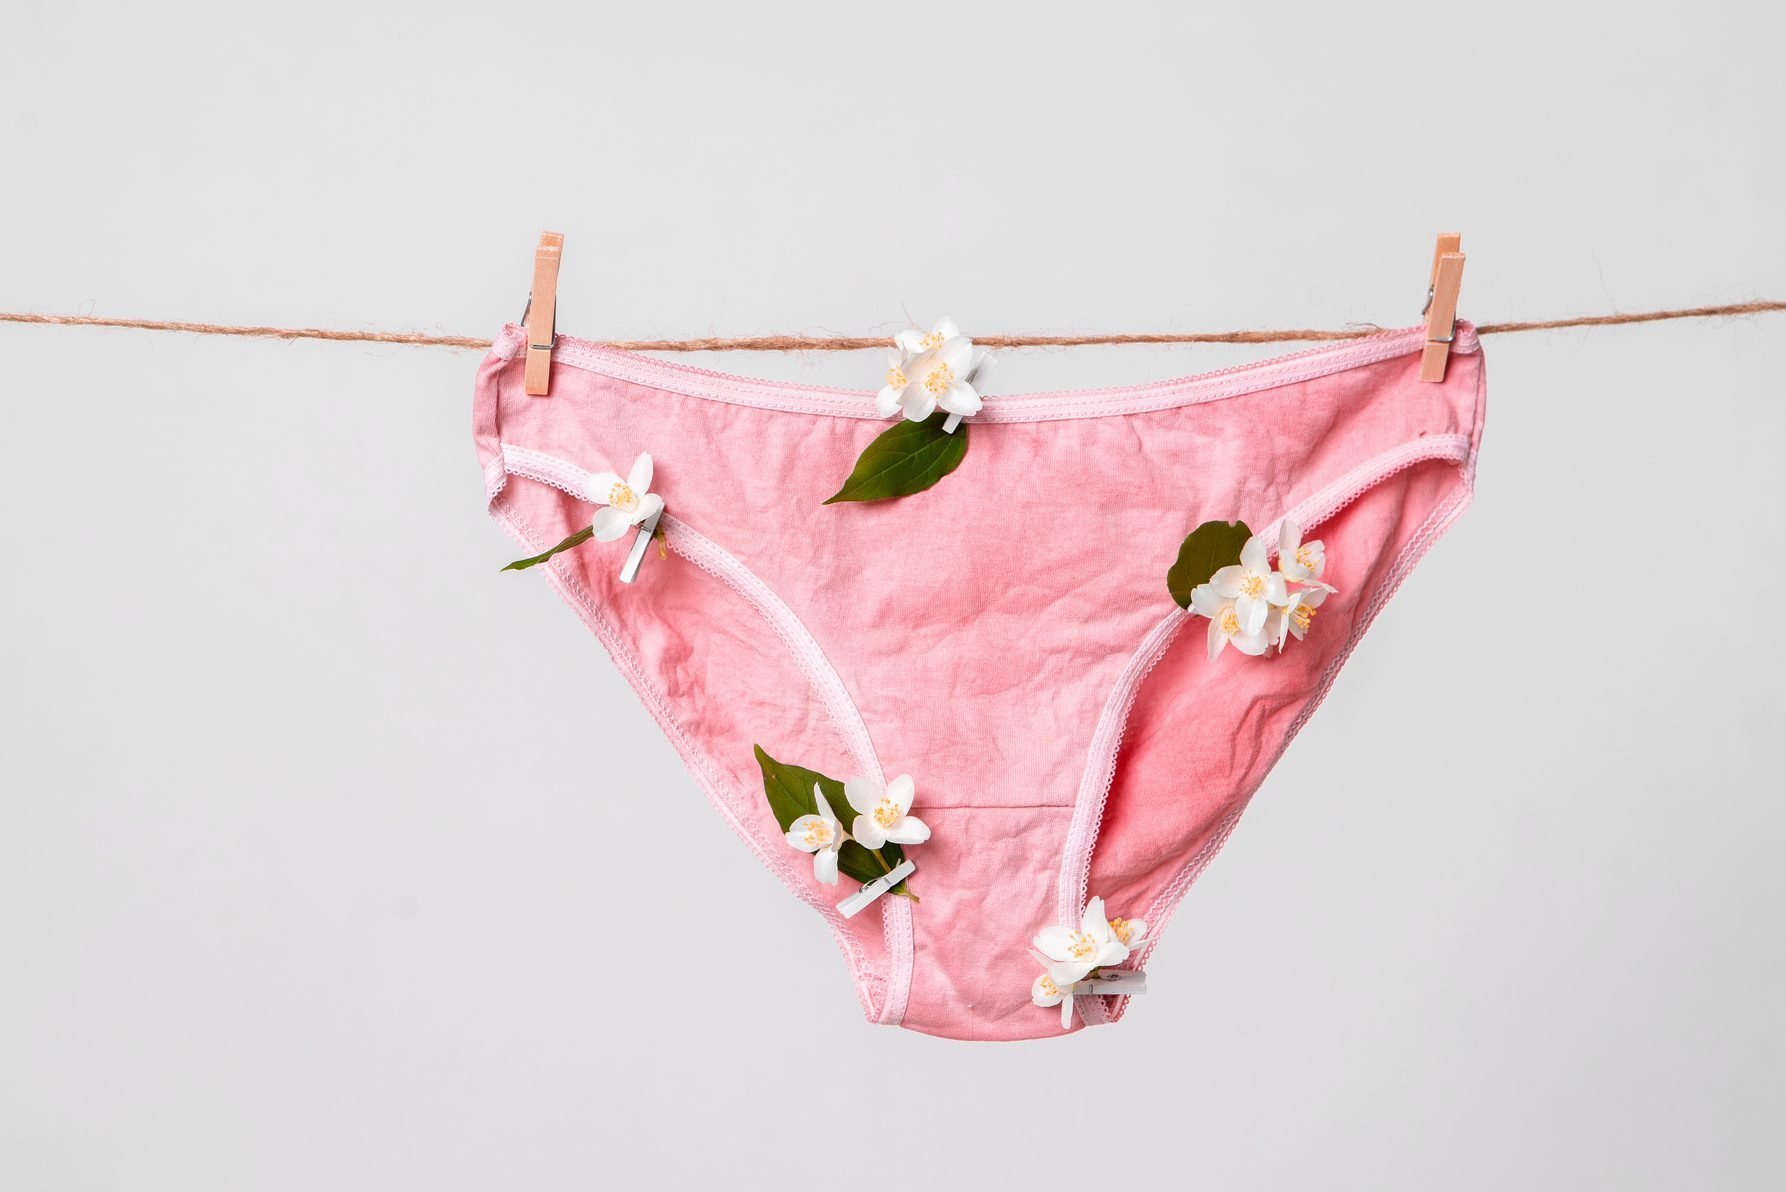 Can wearing thong underwear pose a health risk? Doctors say it